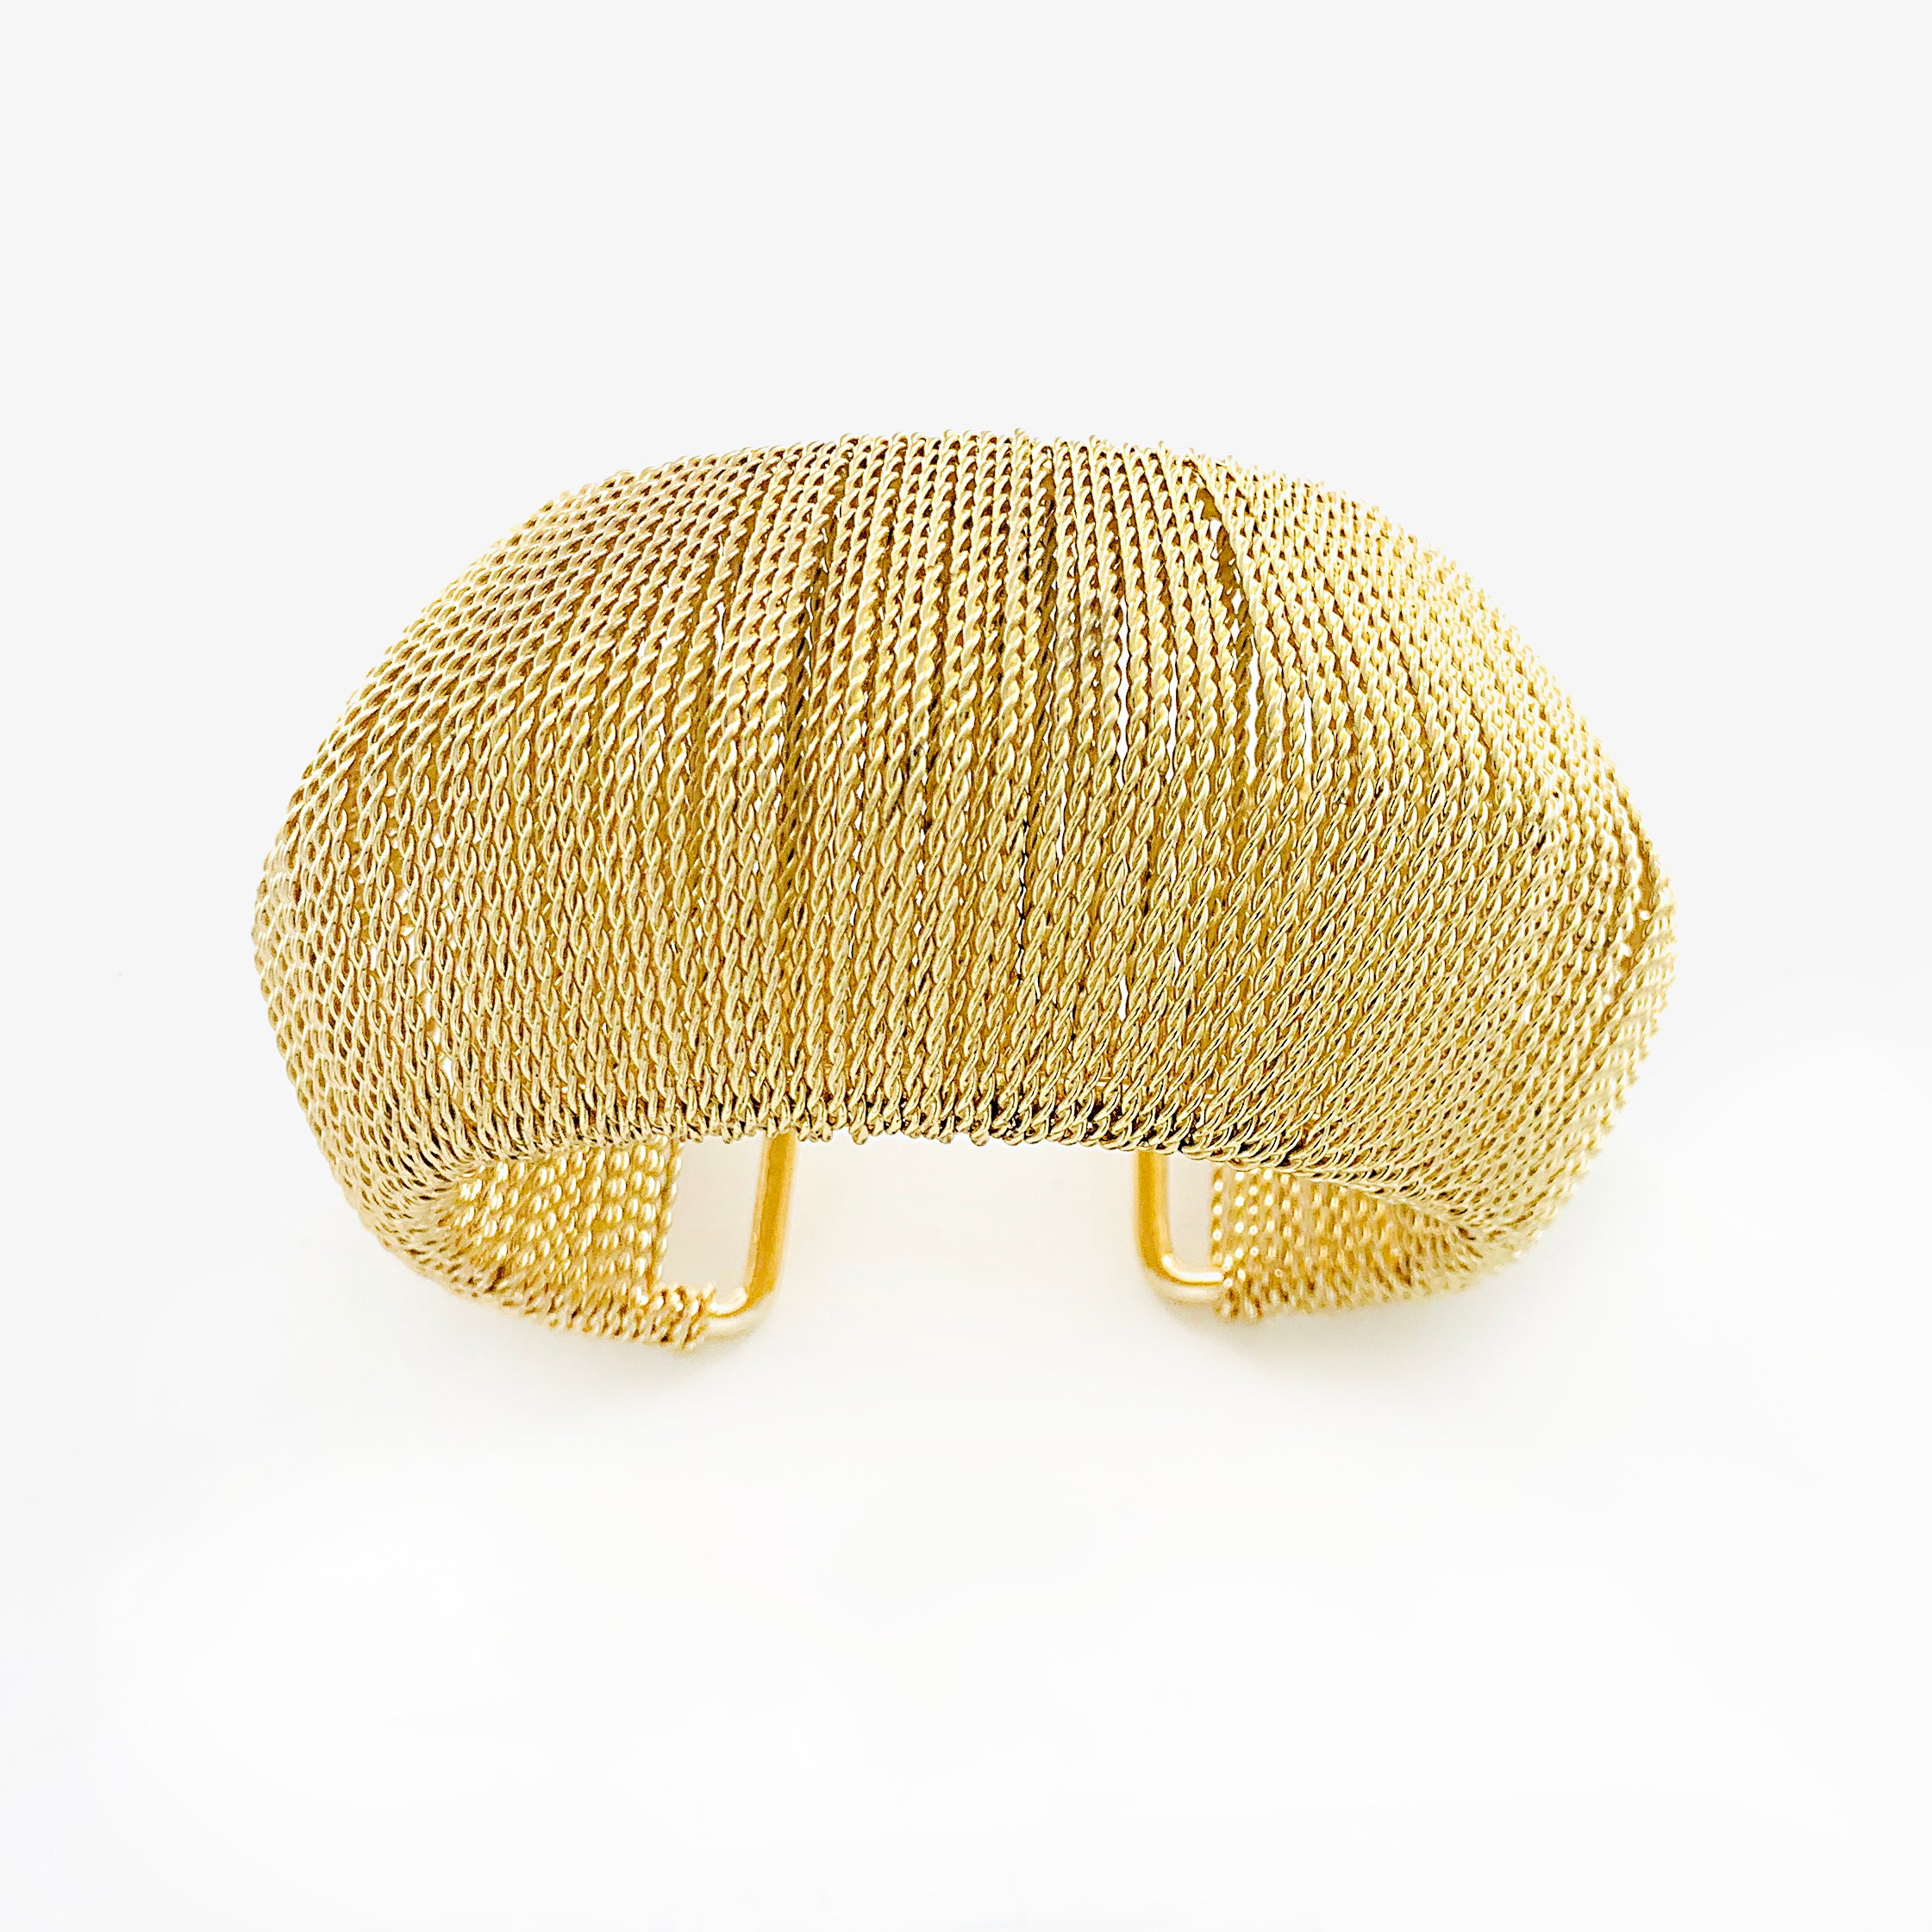 Gold Cuff with twisted gold strands